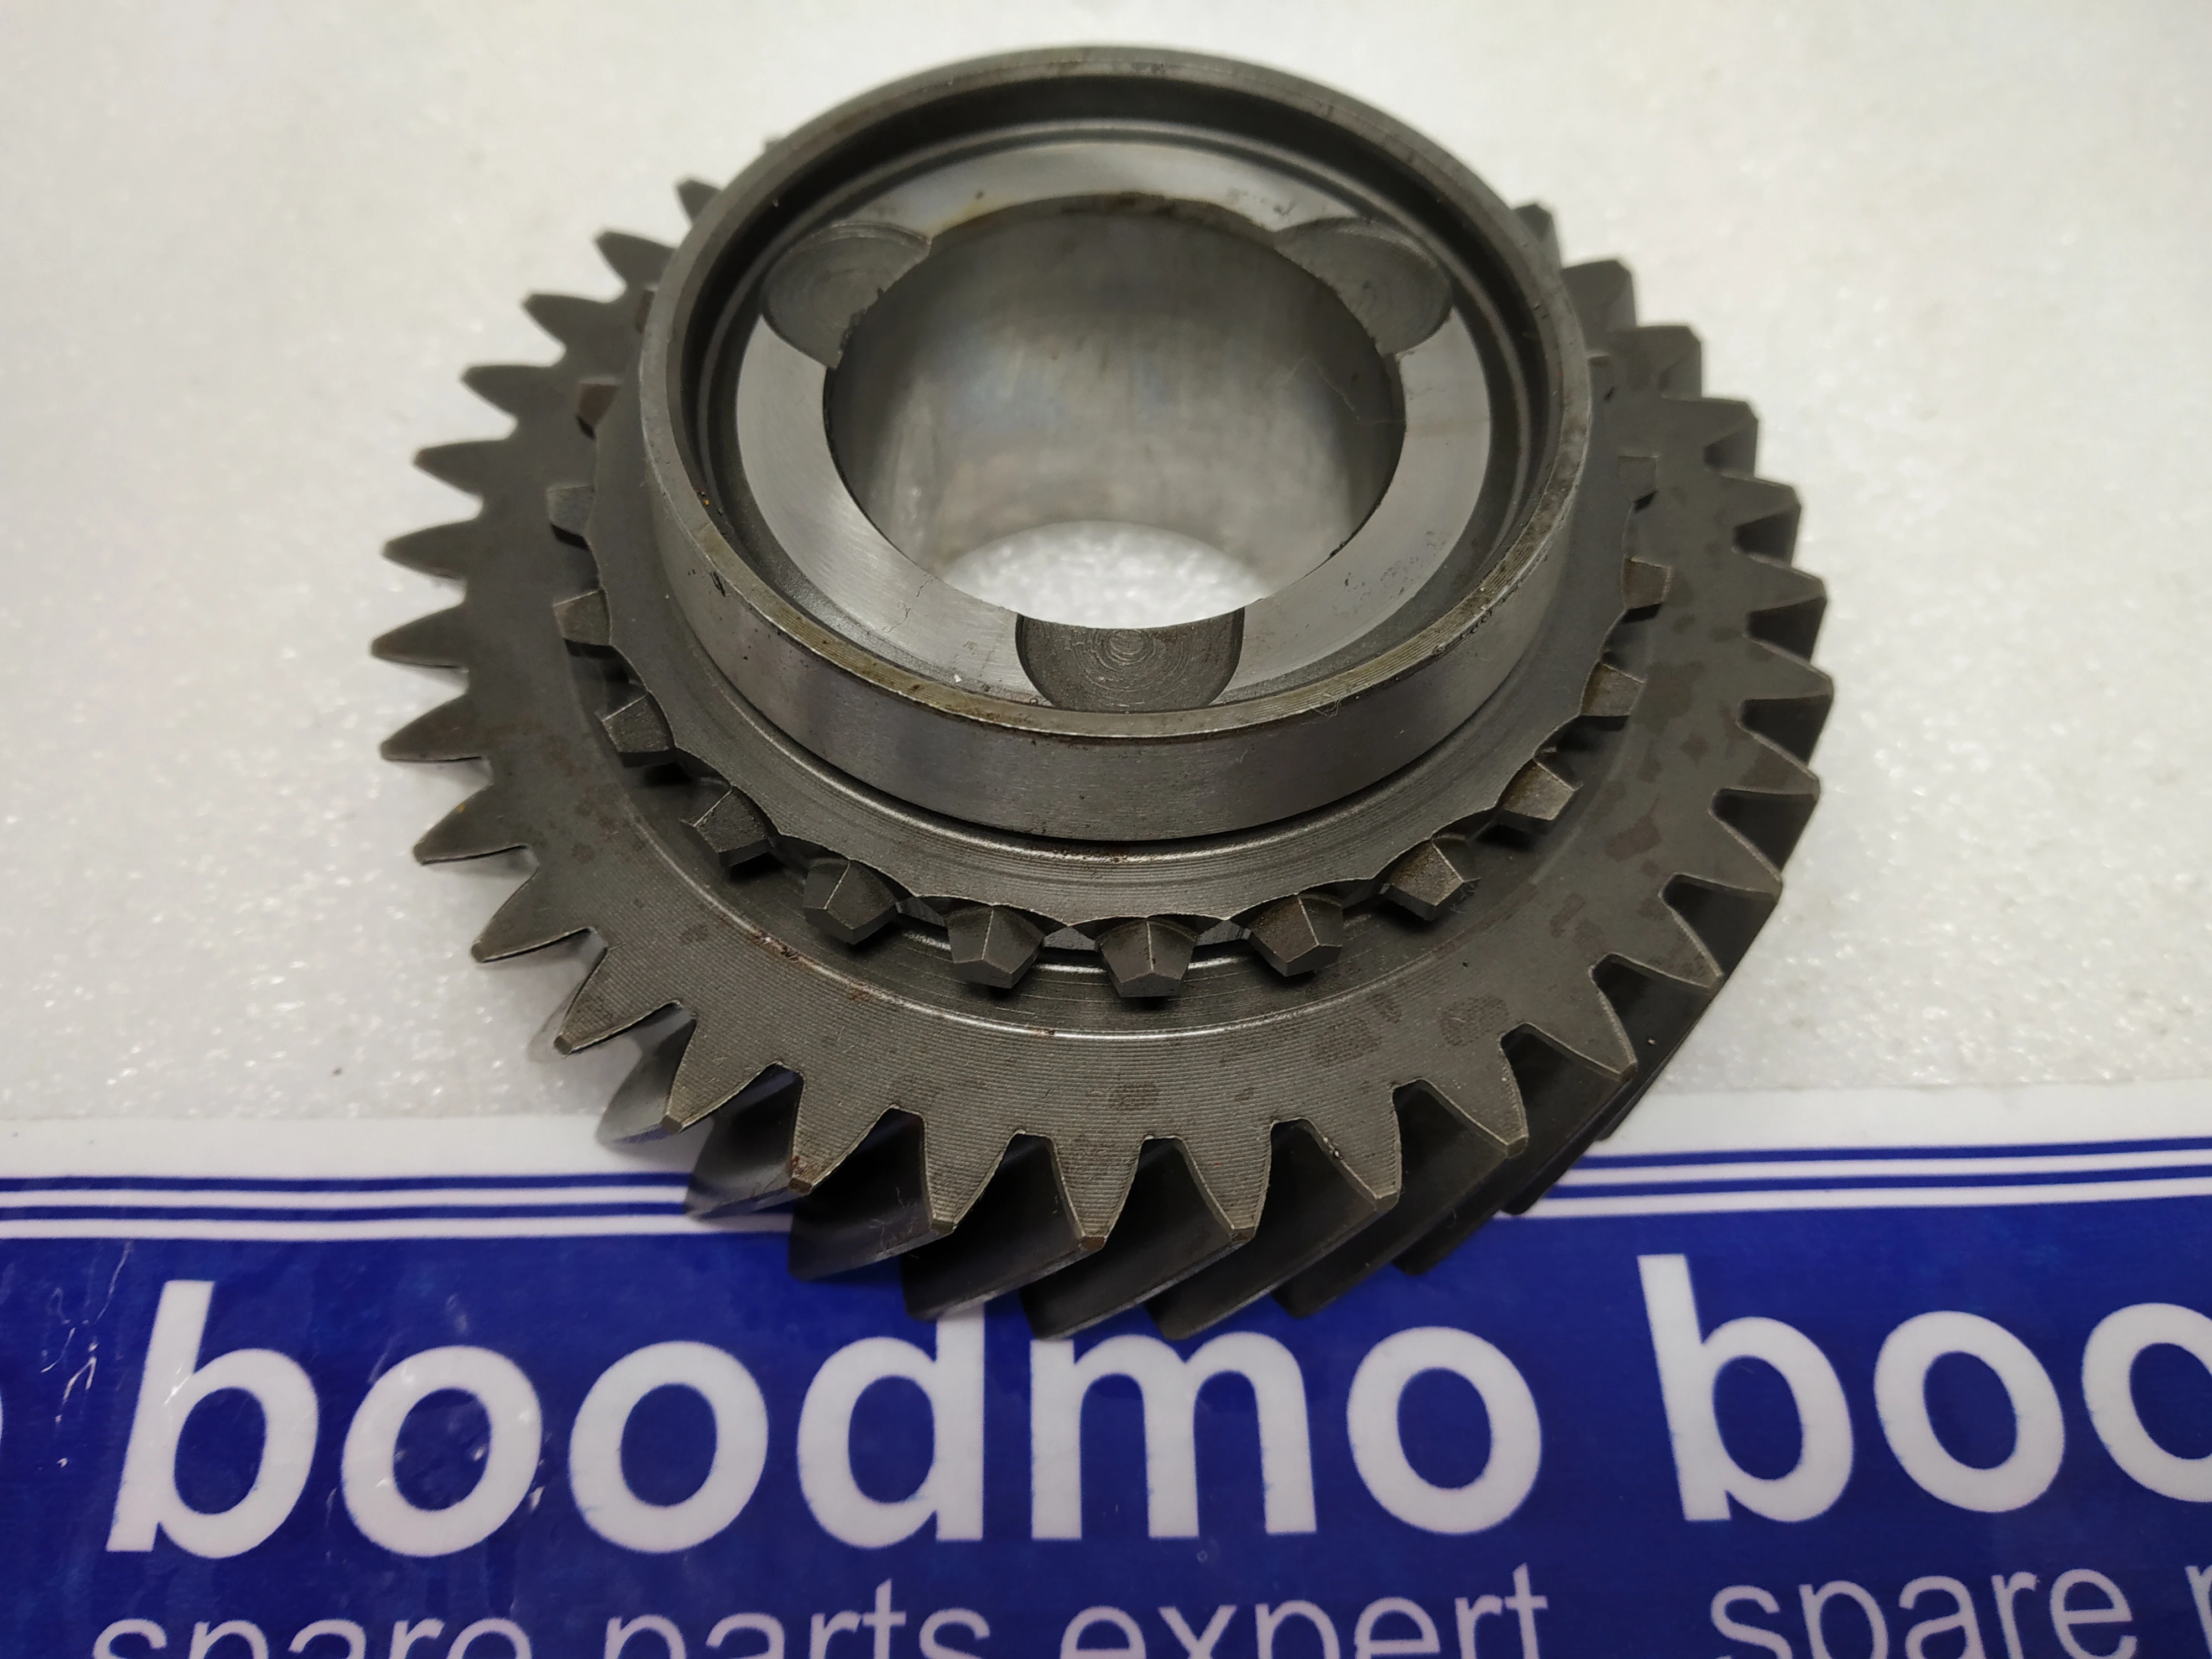 5TH SPEED GEAR (INPUT SHAFT 4DL TCIC): TATA 285455402 -compatibility,  features, prices. boodmo